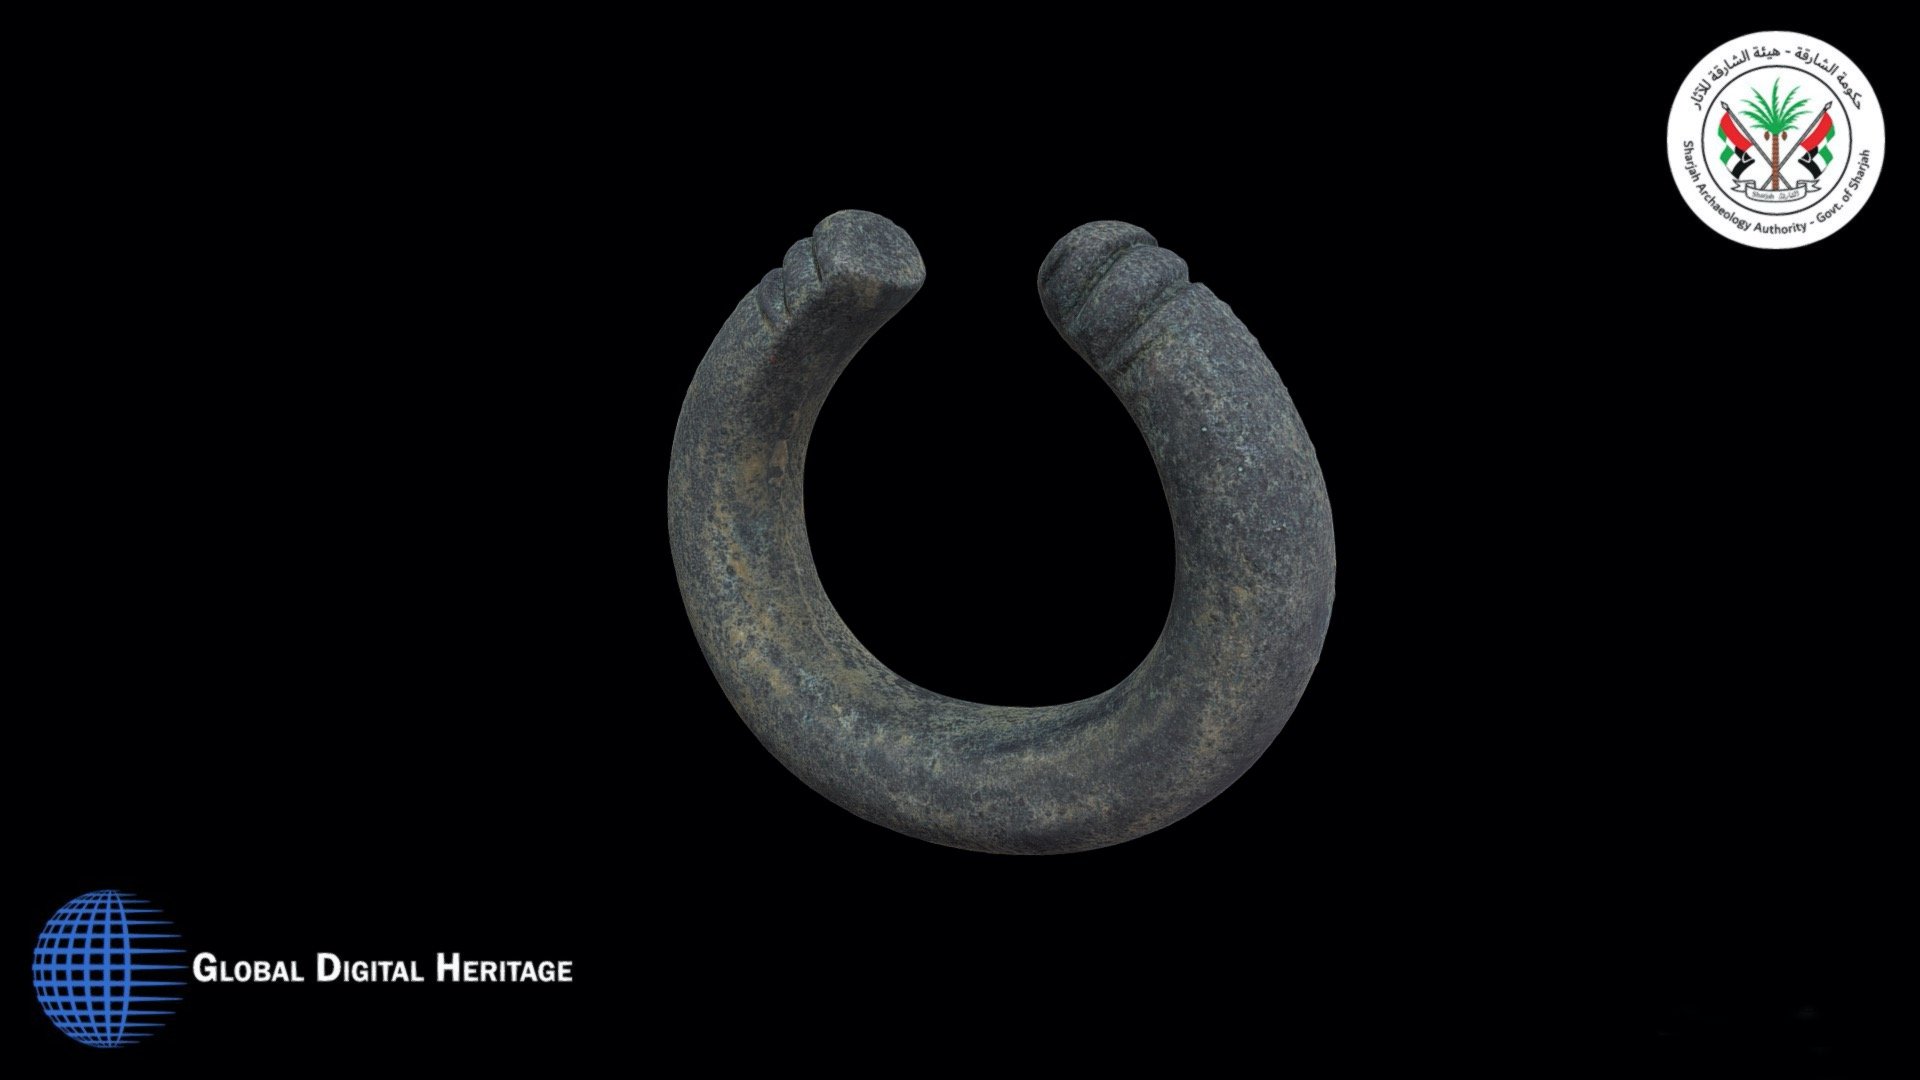 Iron Age heavy (435 gr.) bronze anklet/bangle with incised decoration around the open ends., Jebel al-Buhais, Sharjah, UAE. On display in the Mleiha Archaeological Center. 1st millennium BCE.  Catalog number EXS116. Processed in Reality Capture from 482 images 3d model